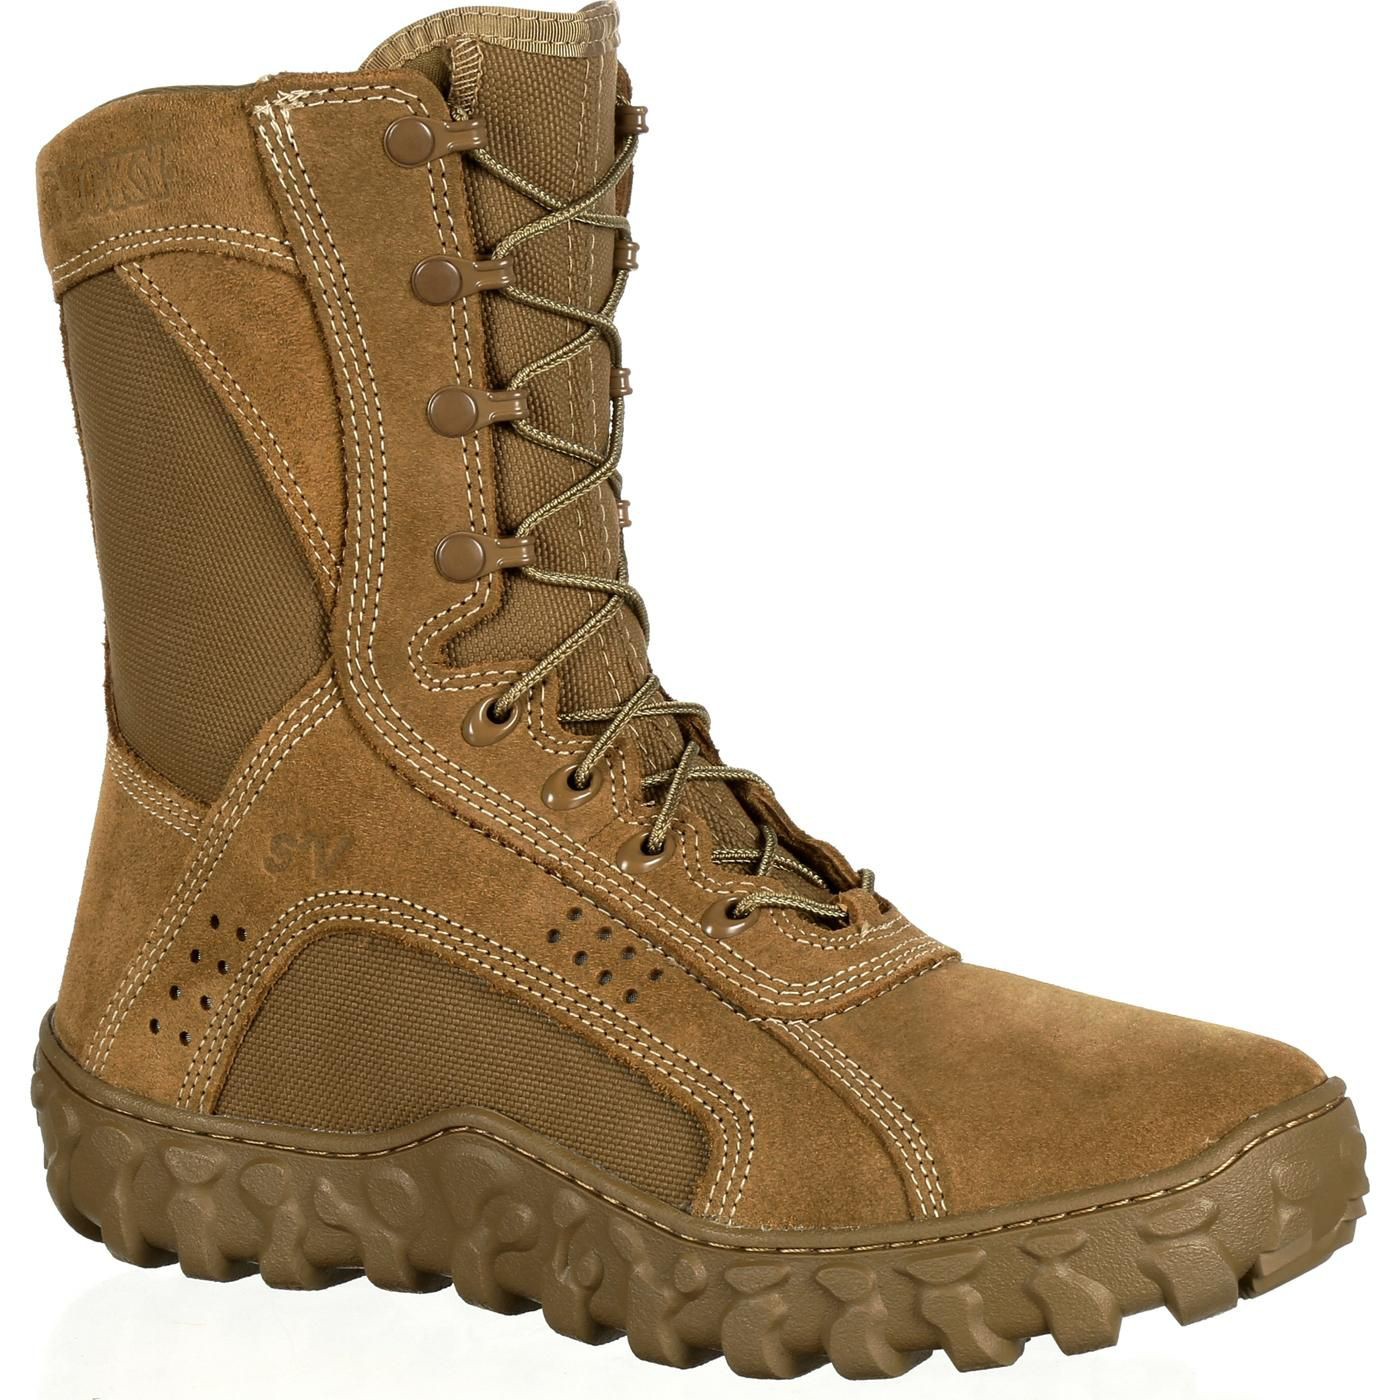 Rocky S2V Tactical Military Boots for Men - Coyote Brown - 4.5M